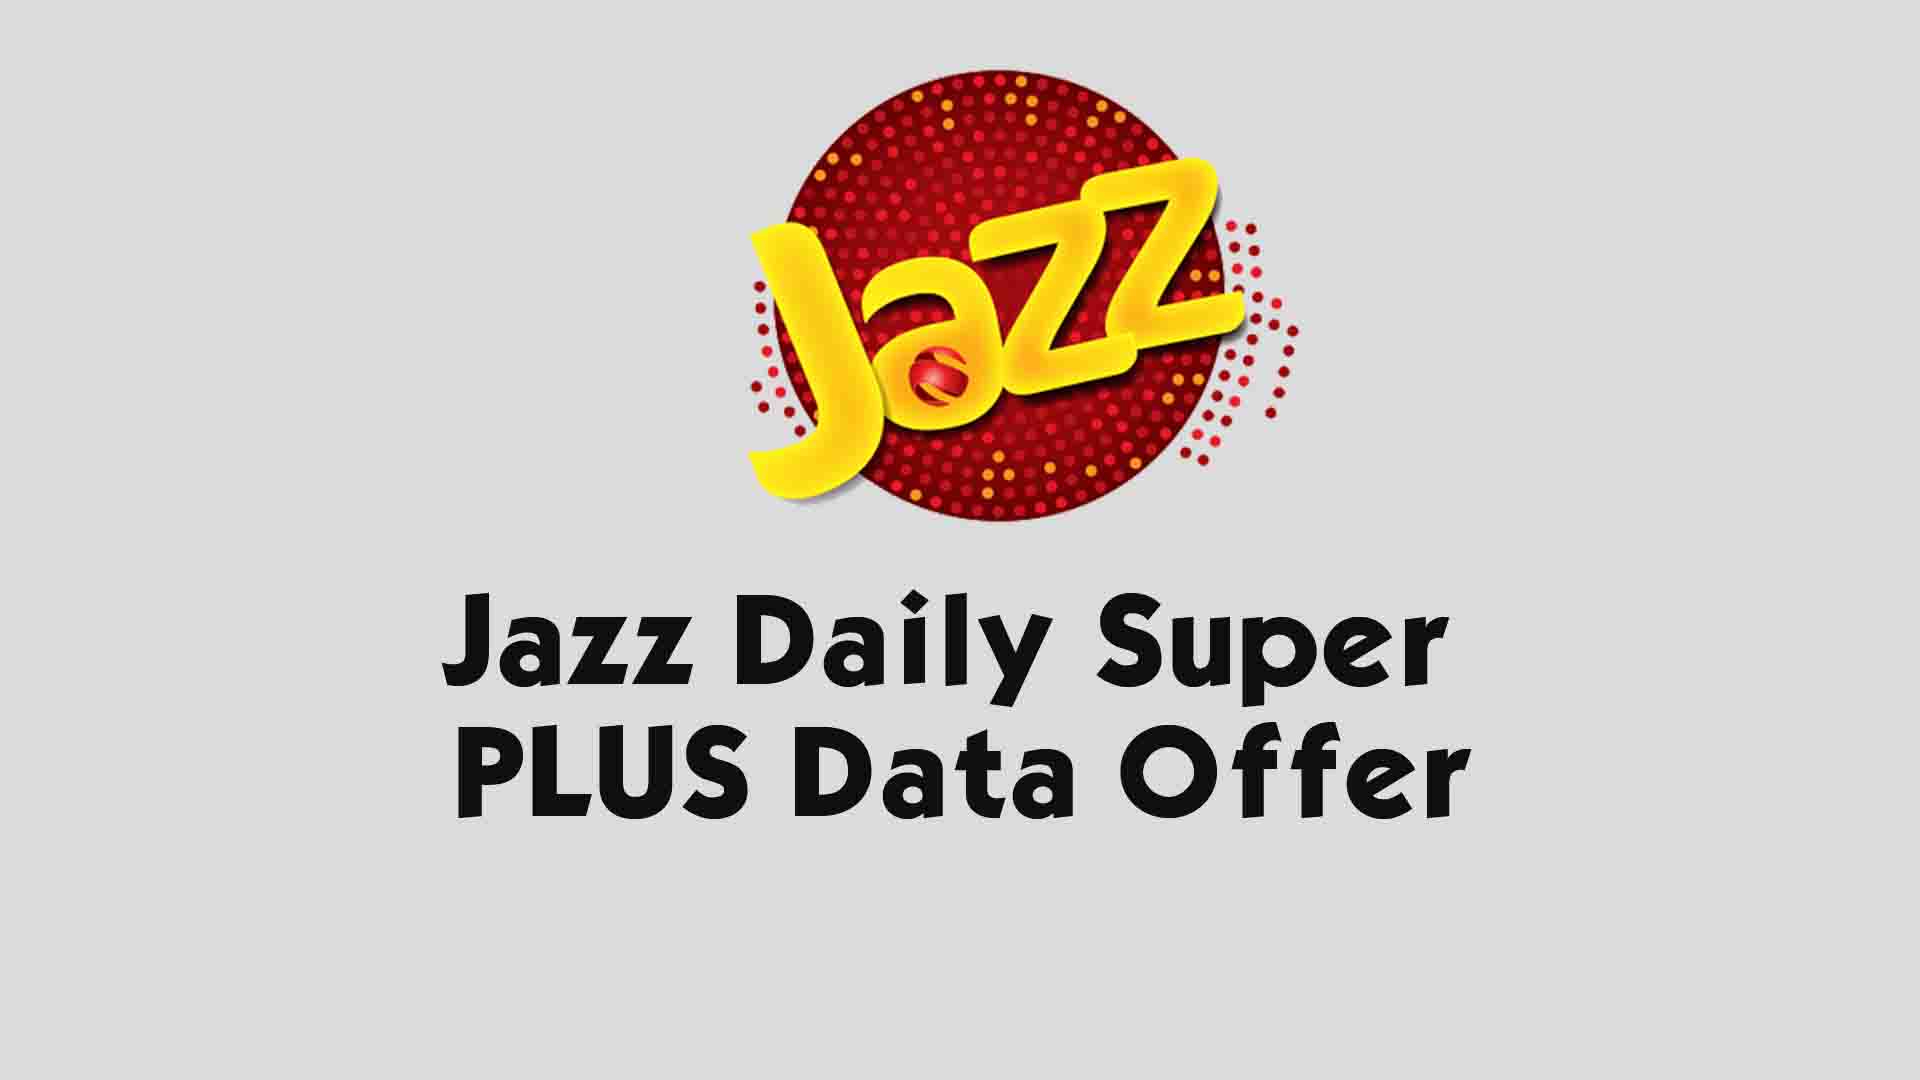 Jazz Daily Super PLUS Data Offer